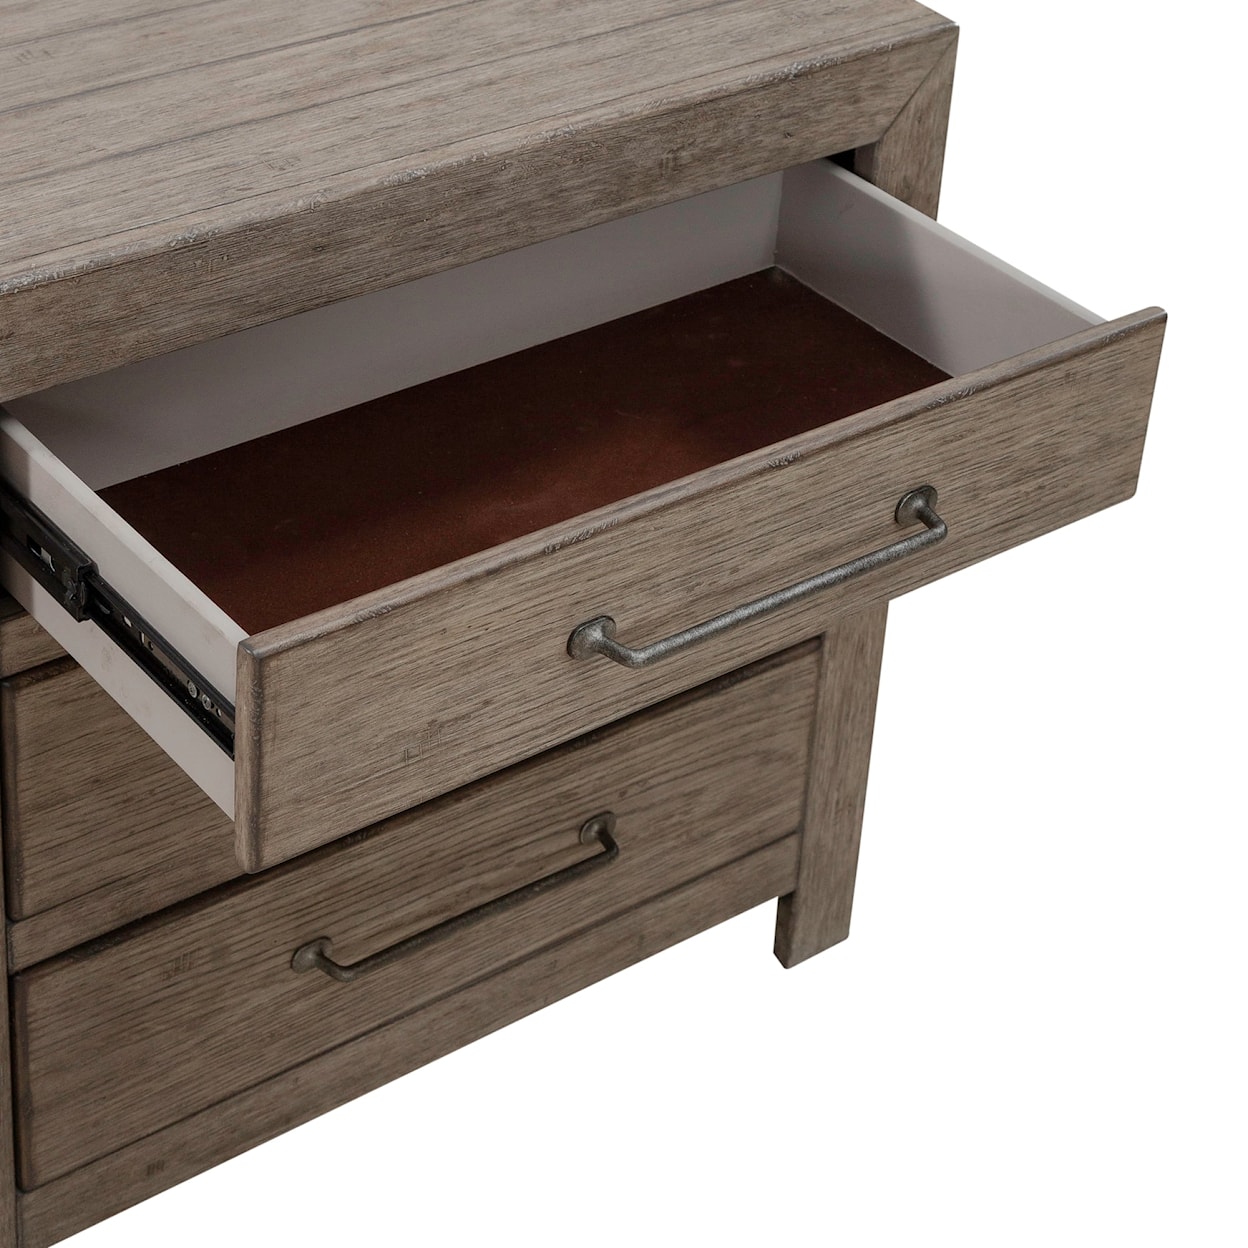 Libby Skyview Lodge 3-Drawer Nightstand